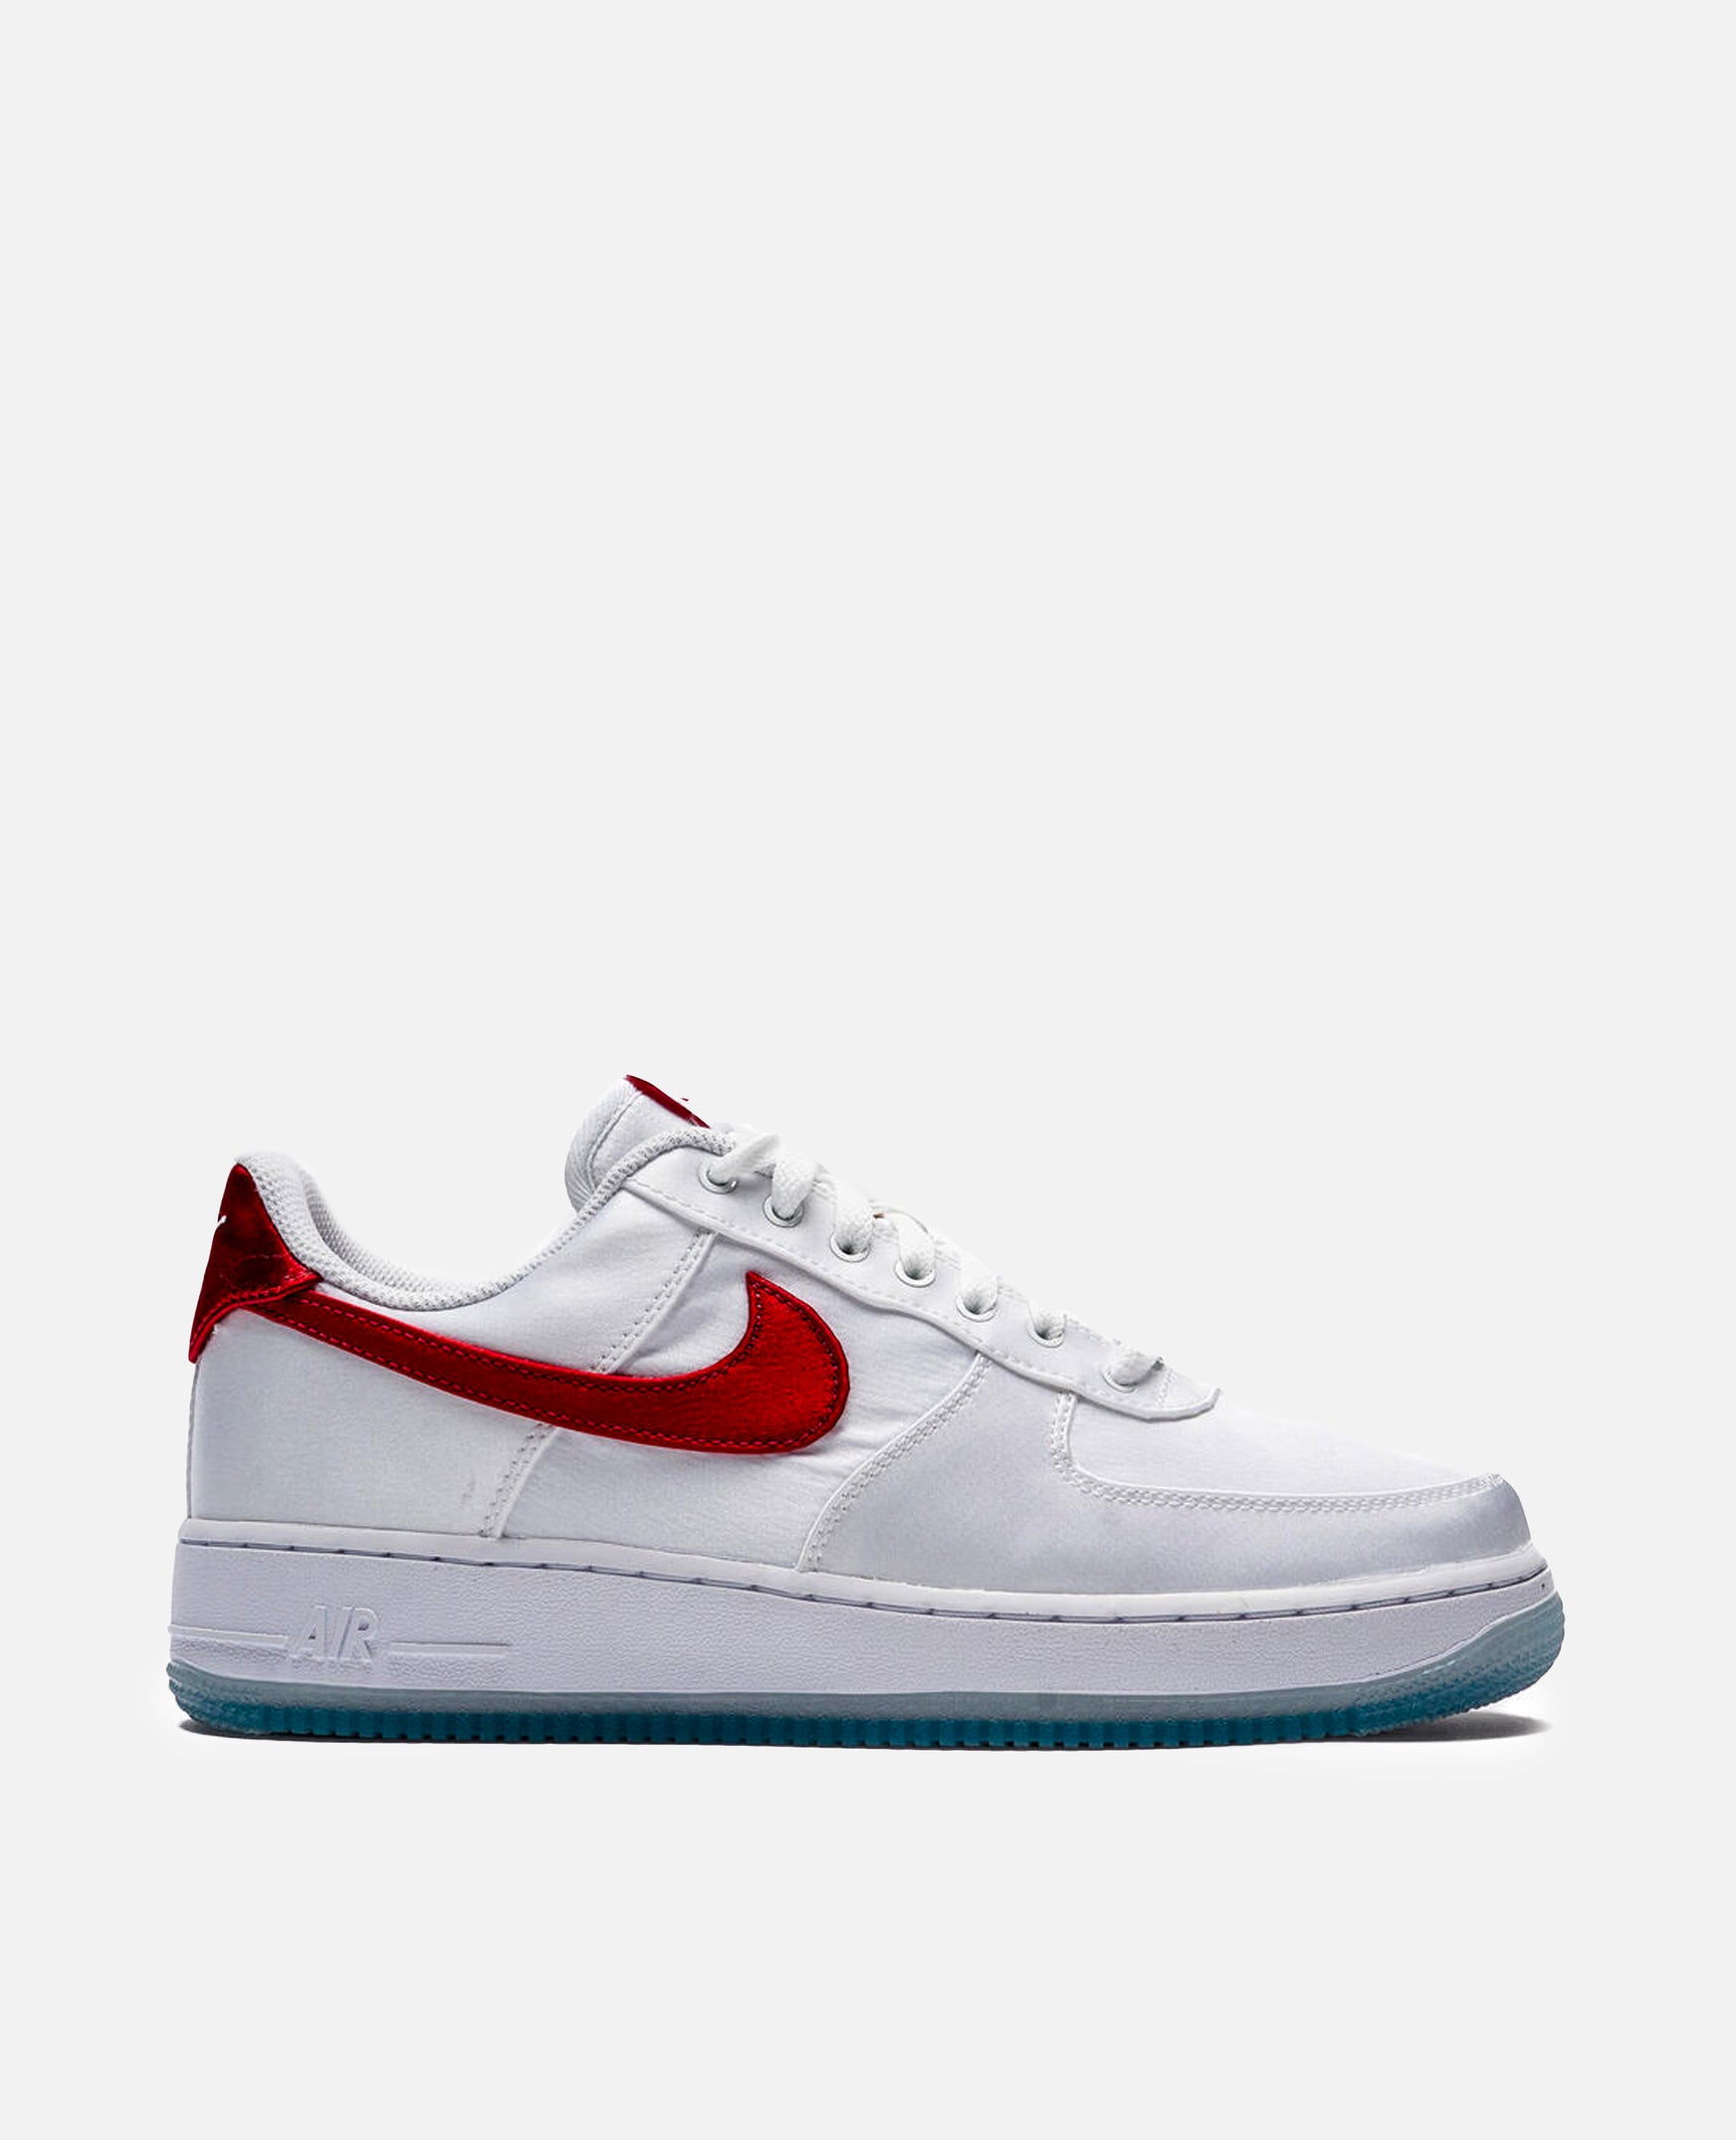 WMNS Nike Air Force 1 '07 (White/Varsity Red)